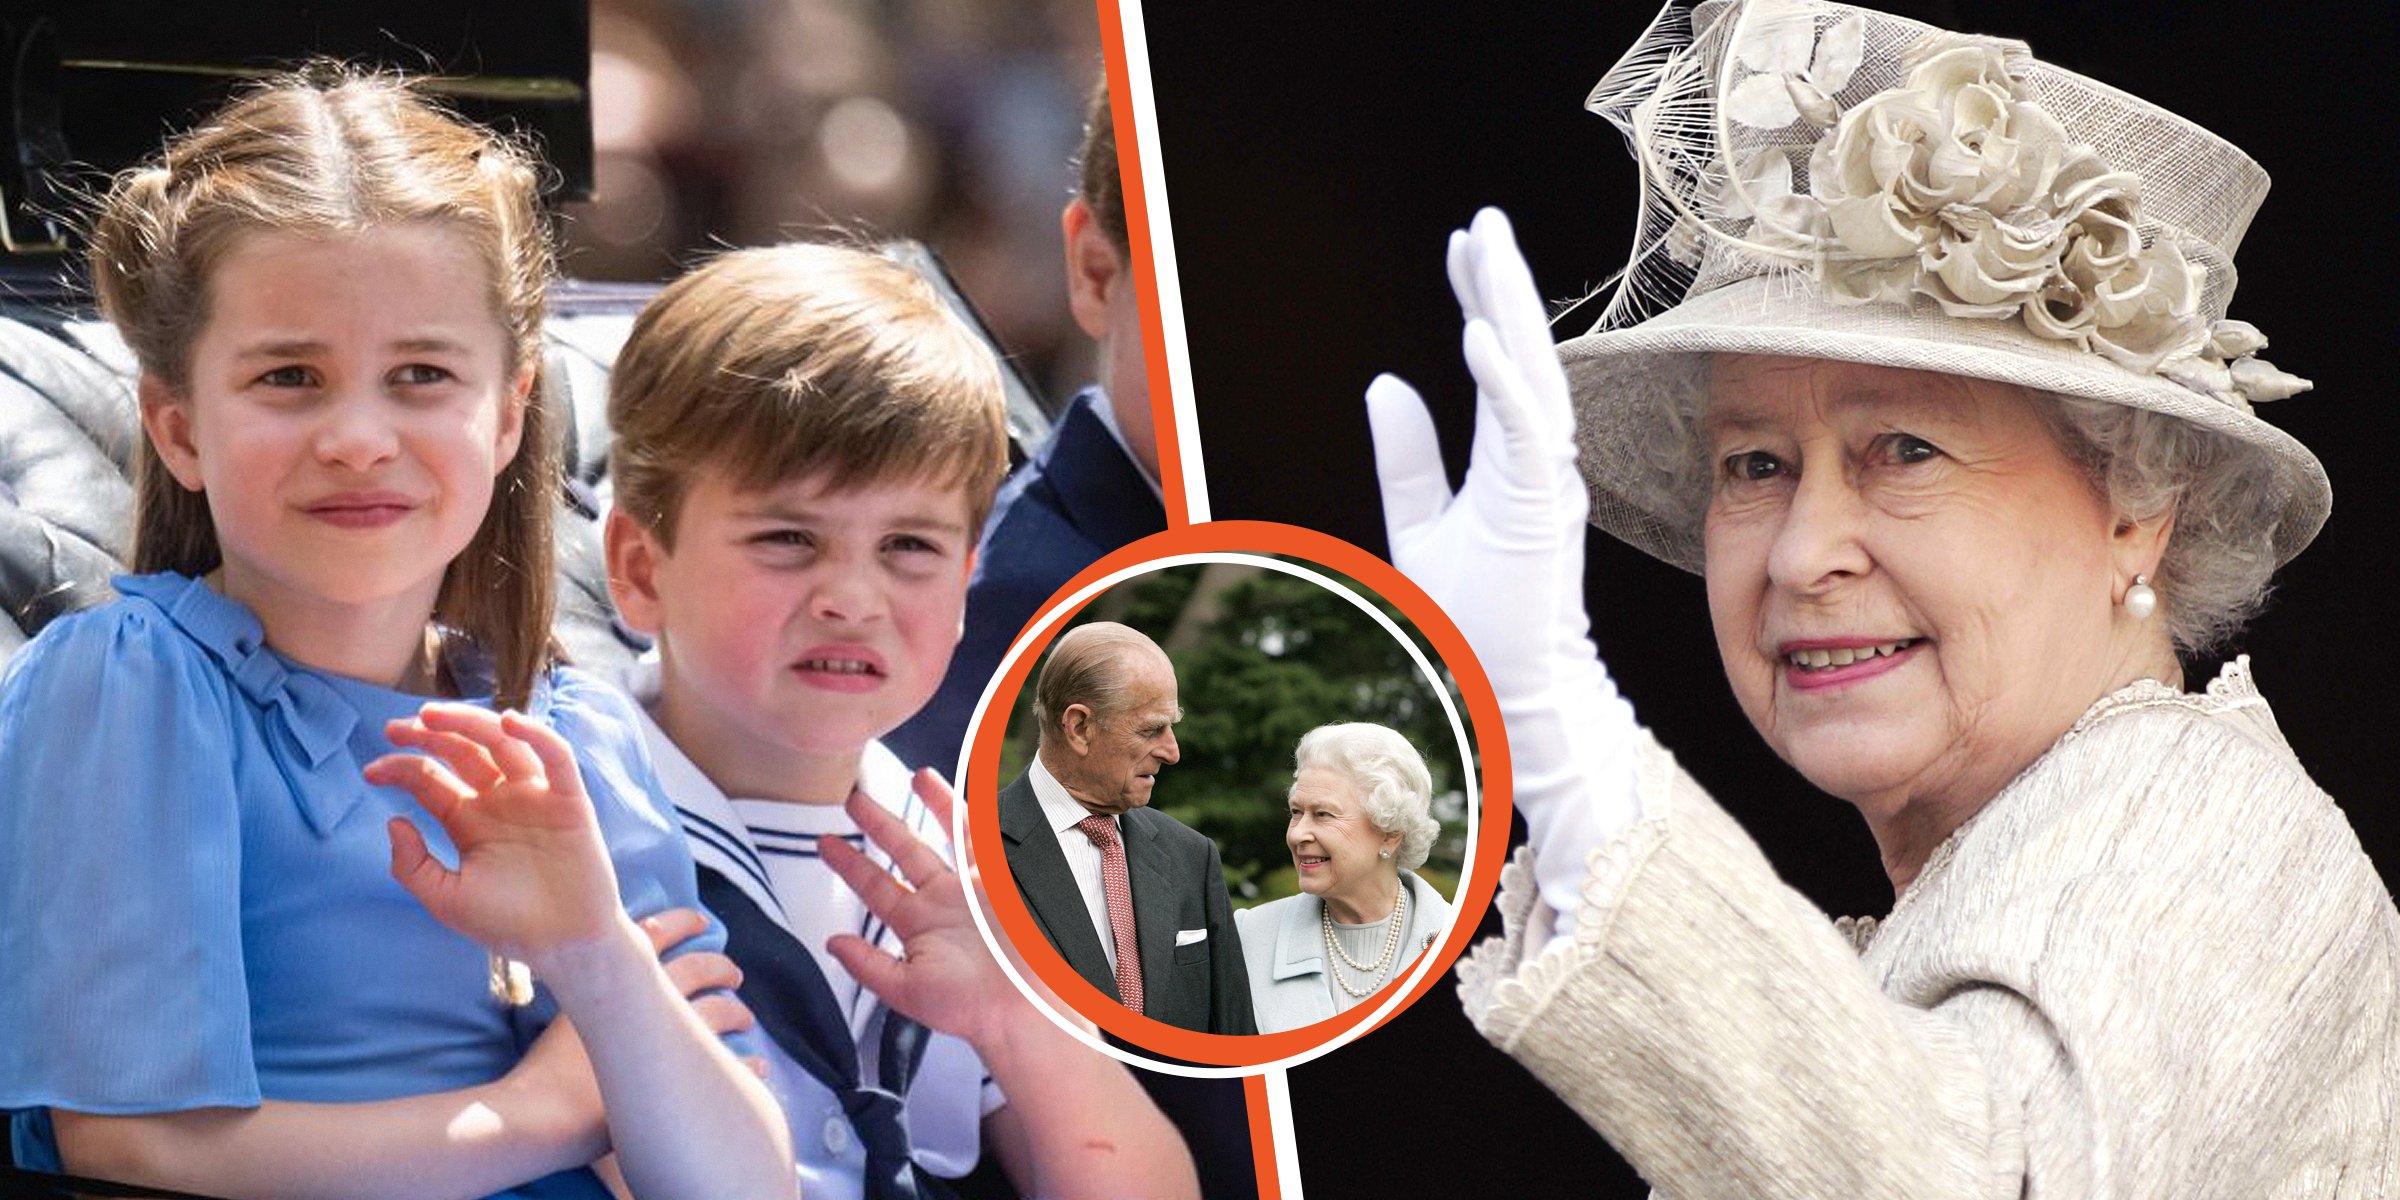 Queen Elizabeth II, Prince George, Princess Charlotte and Prince Philip. | Source: Getty Images